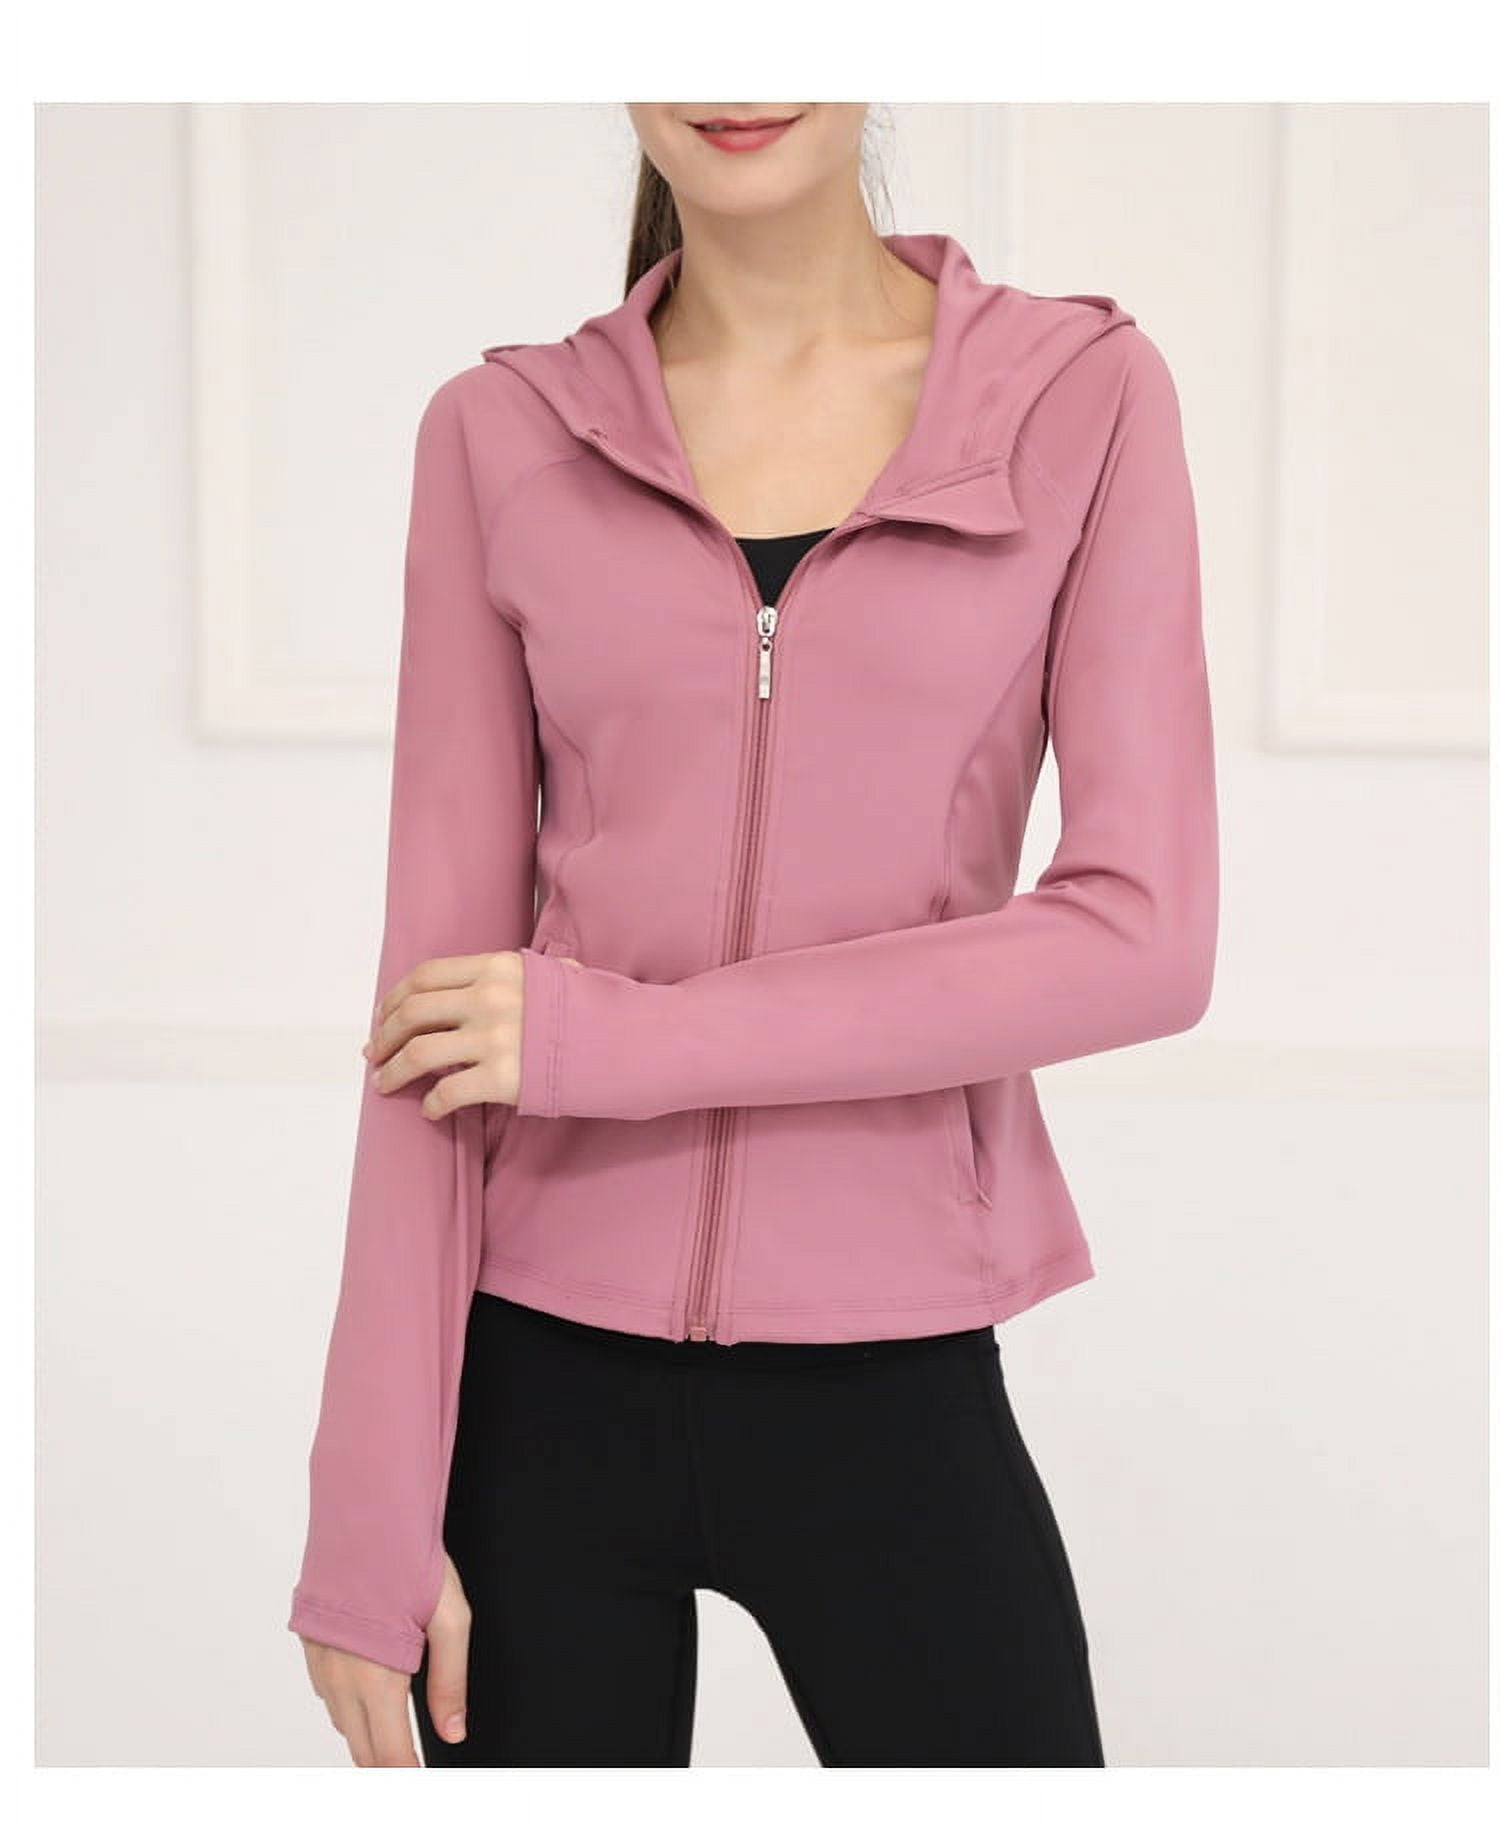 Dasawamedh Women's Running Sport Track Jacket Full Zip Workout Athletic  Fitness Jackets for Training With Thumb Holes Pink Heather XS at   Women's Clothing store